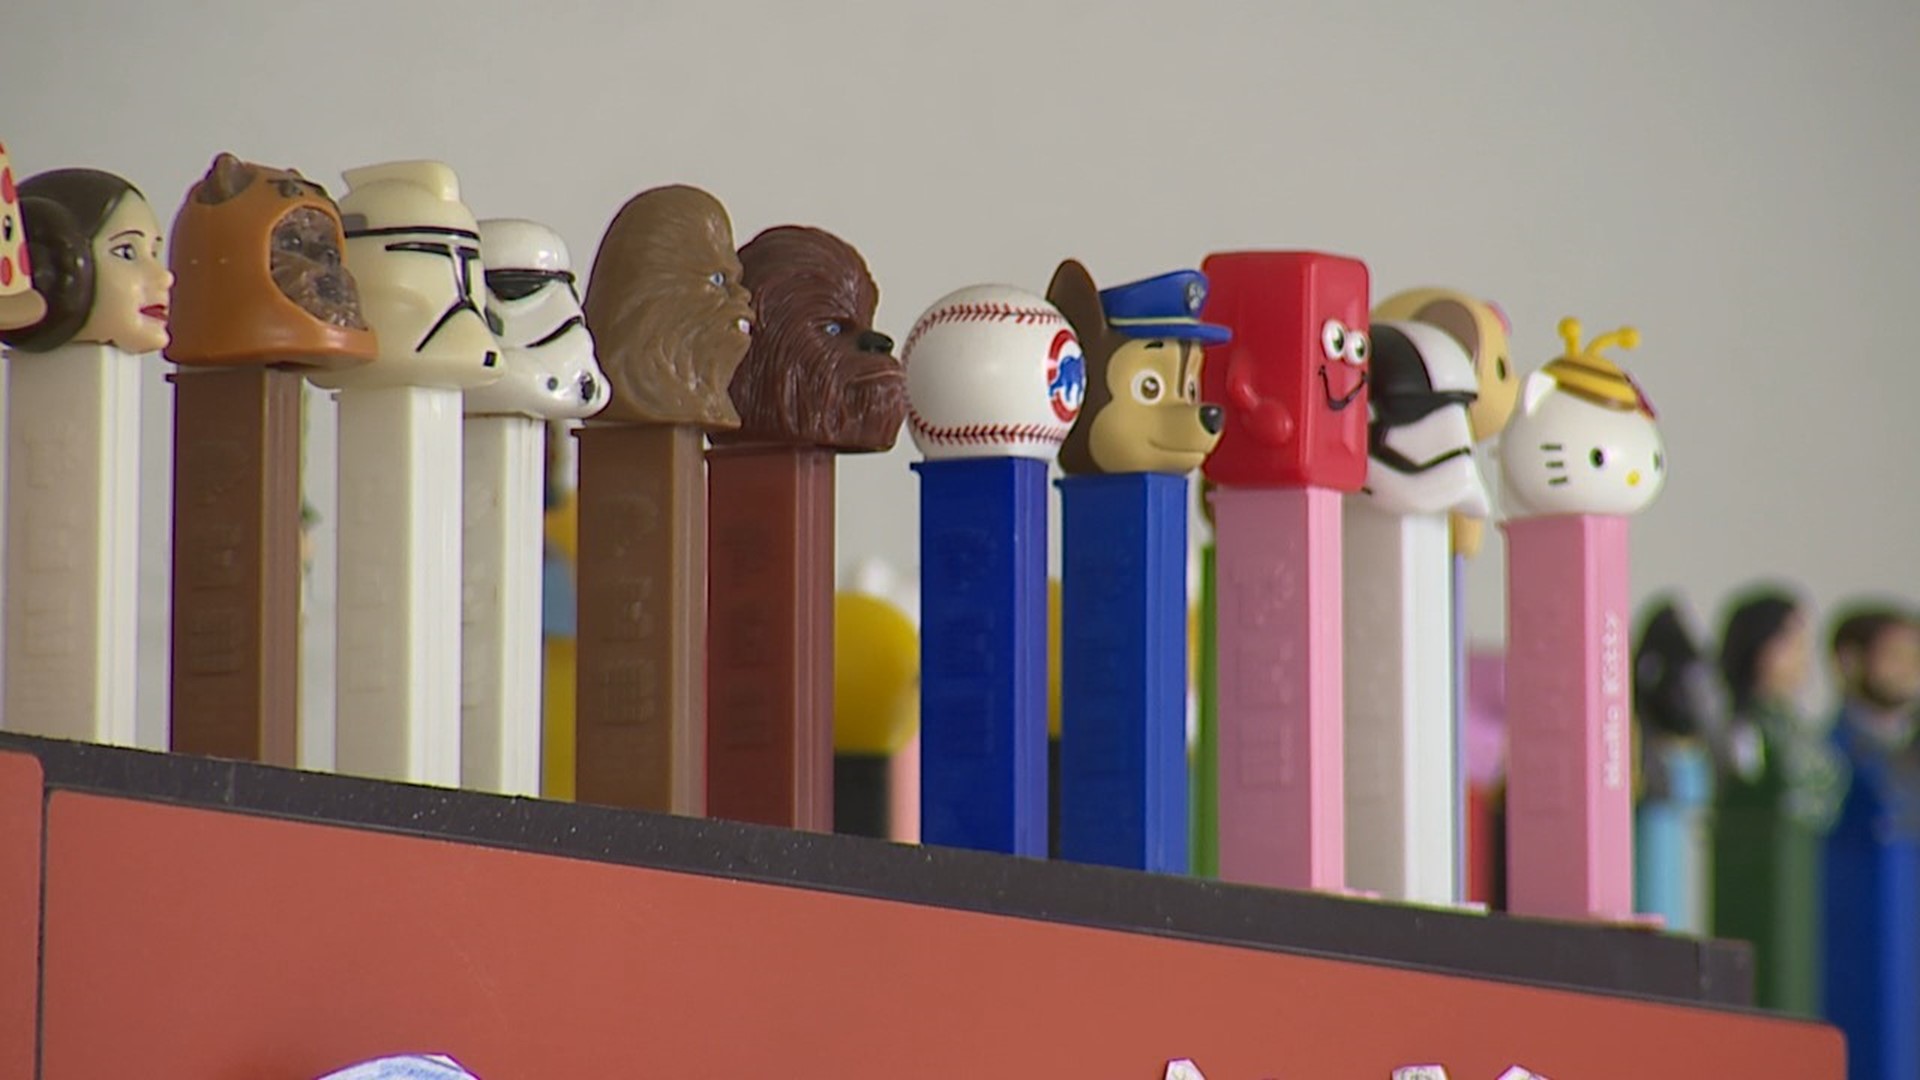 A third grade teacher has 638 PEZ dispensers in her classroom. Meanwhile the principal has 120 Mr. Potato Heads in his office.